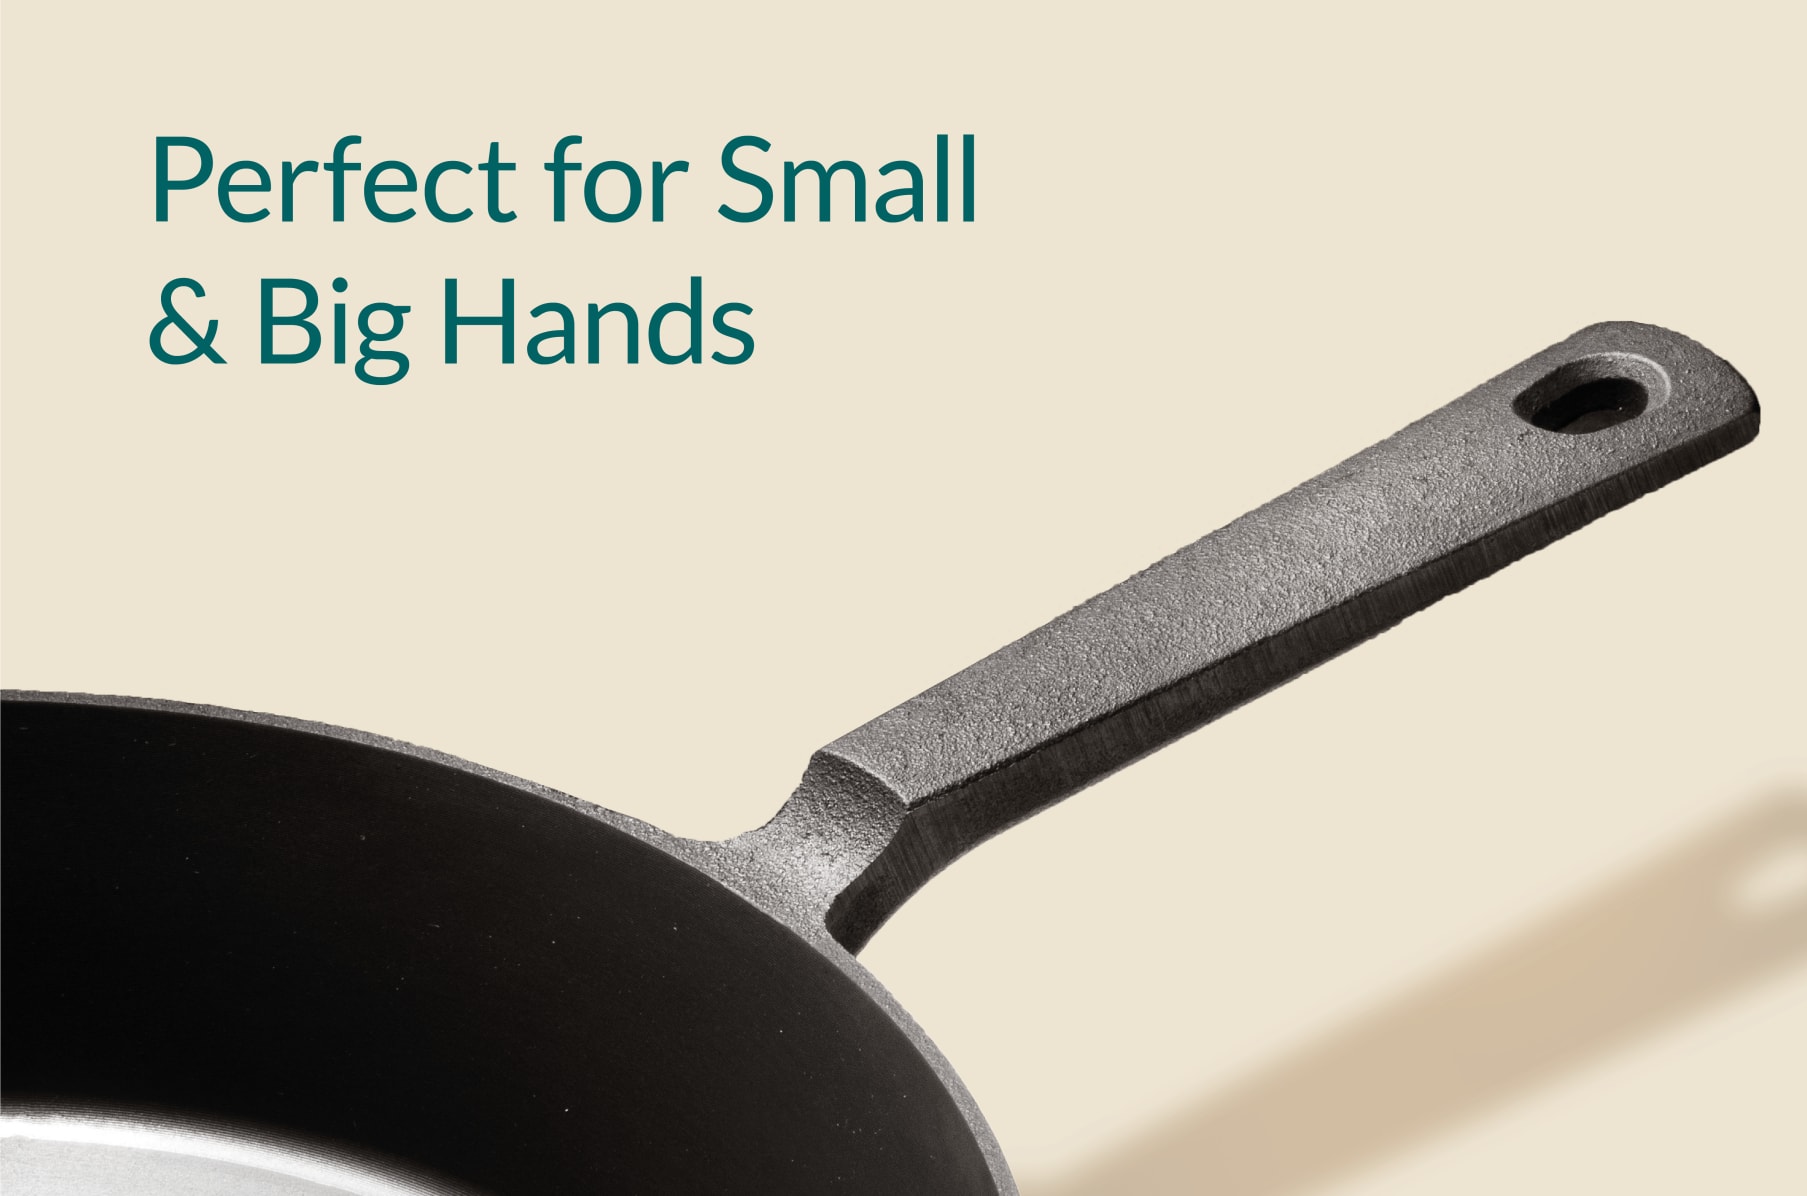 STUR Skillet: The German Cast-Iron Skillet - Made to Last by STUR